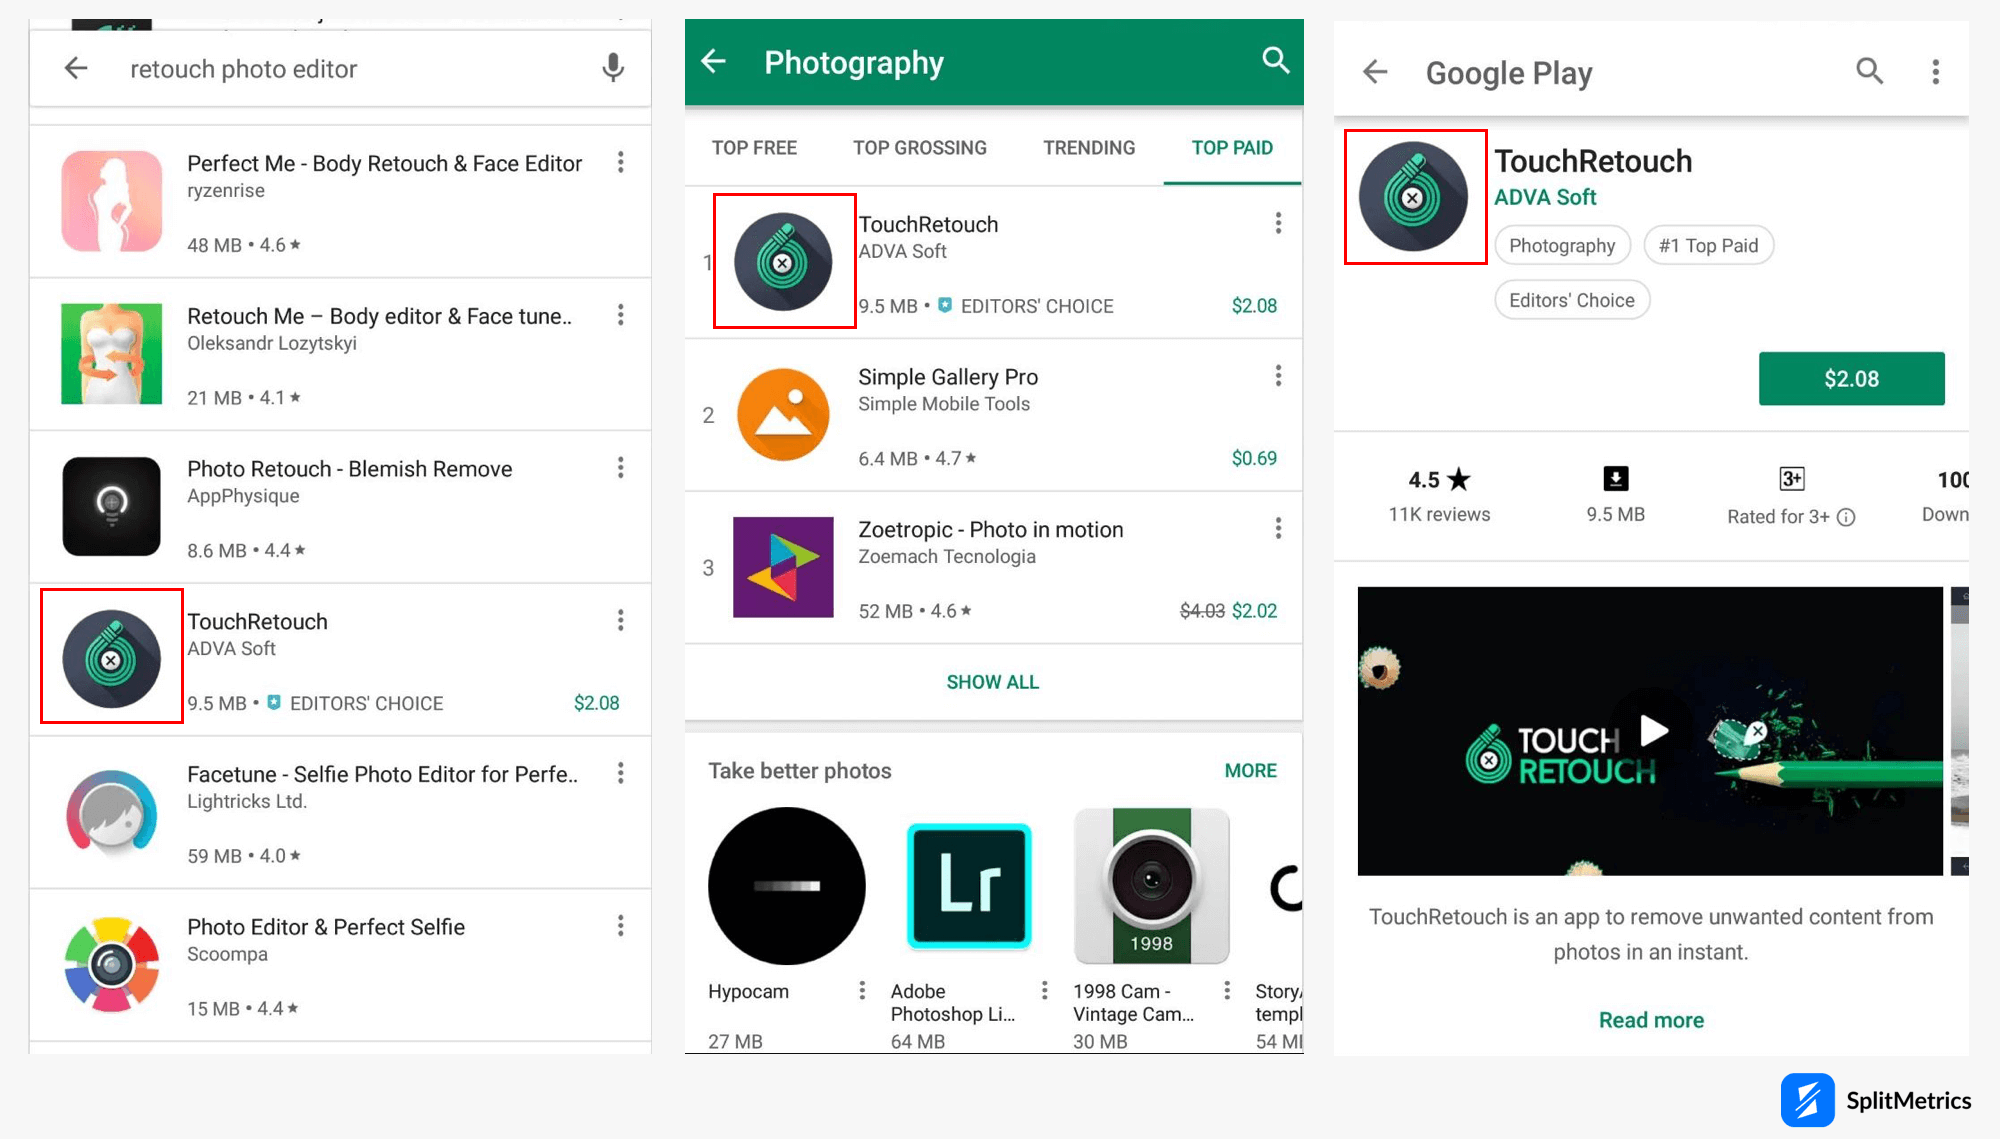 Google Play product page icon